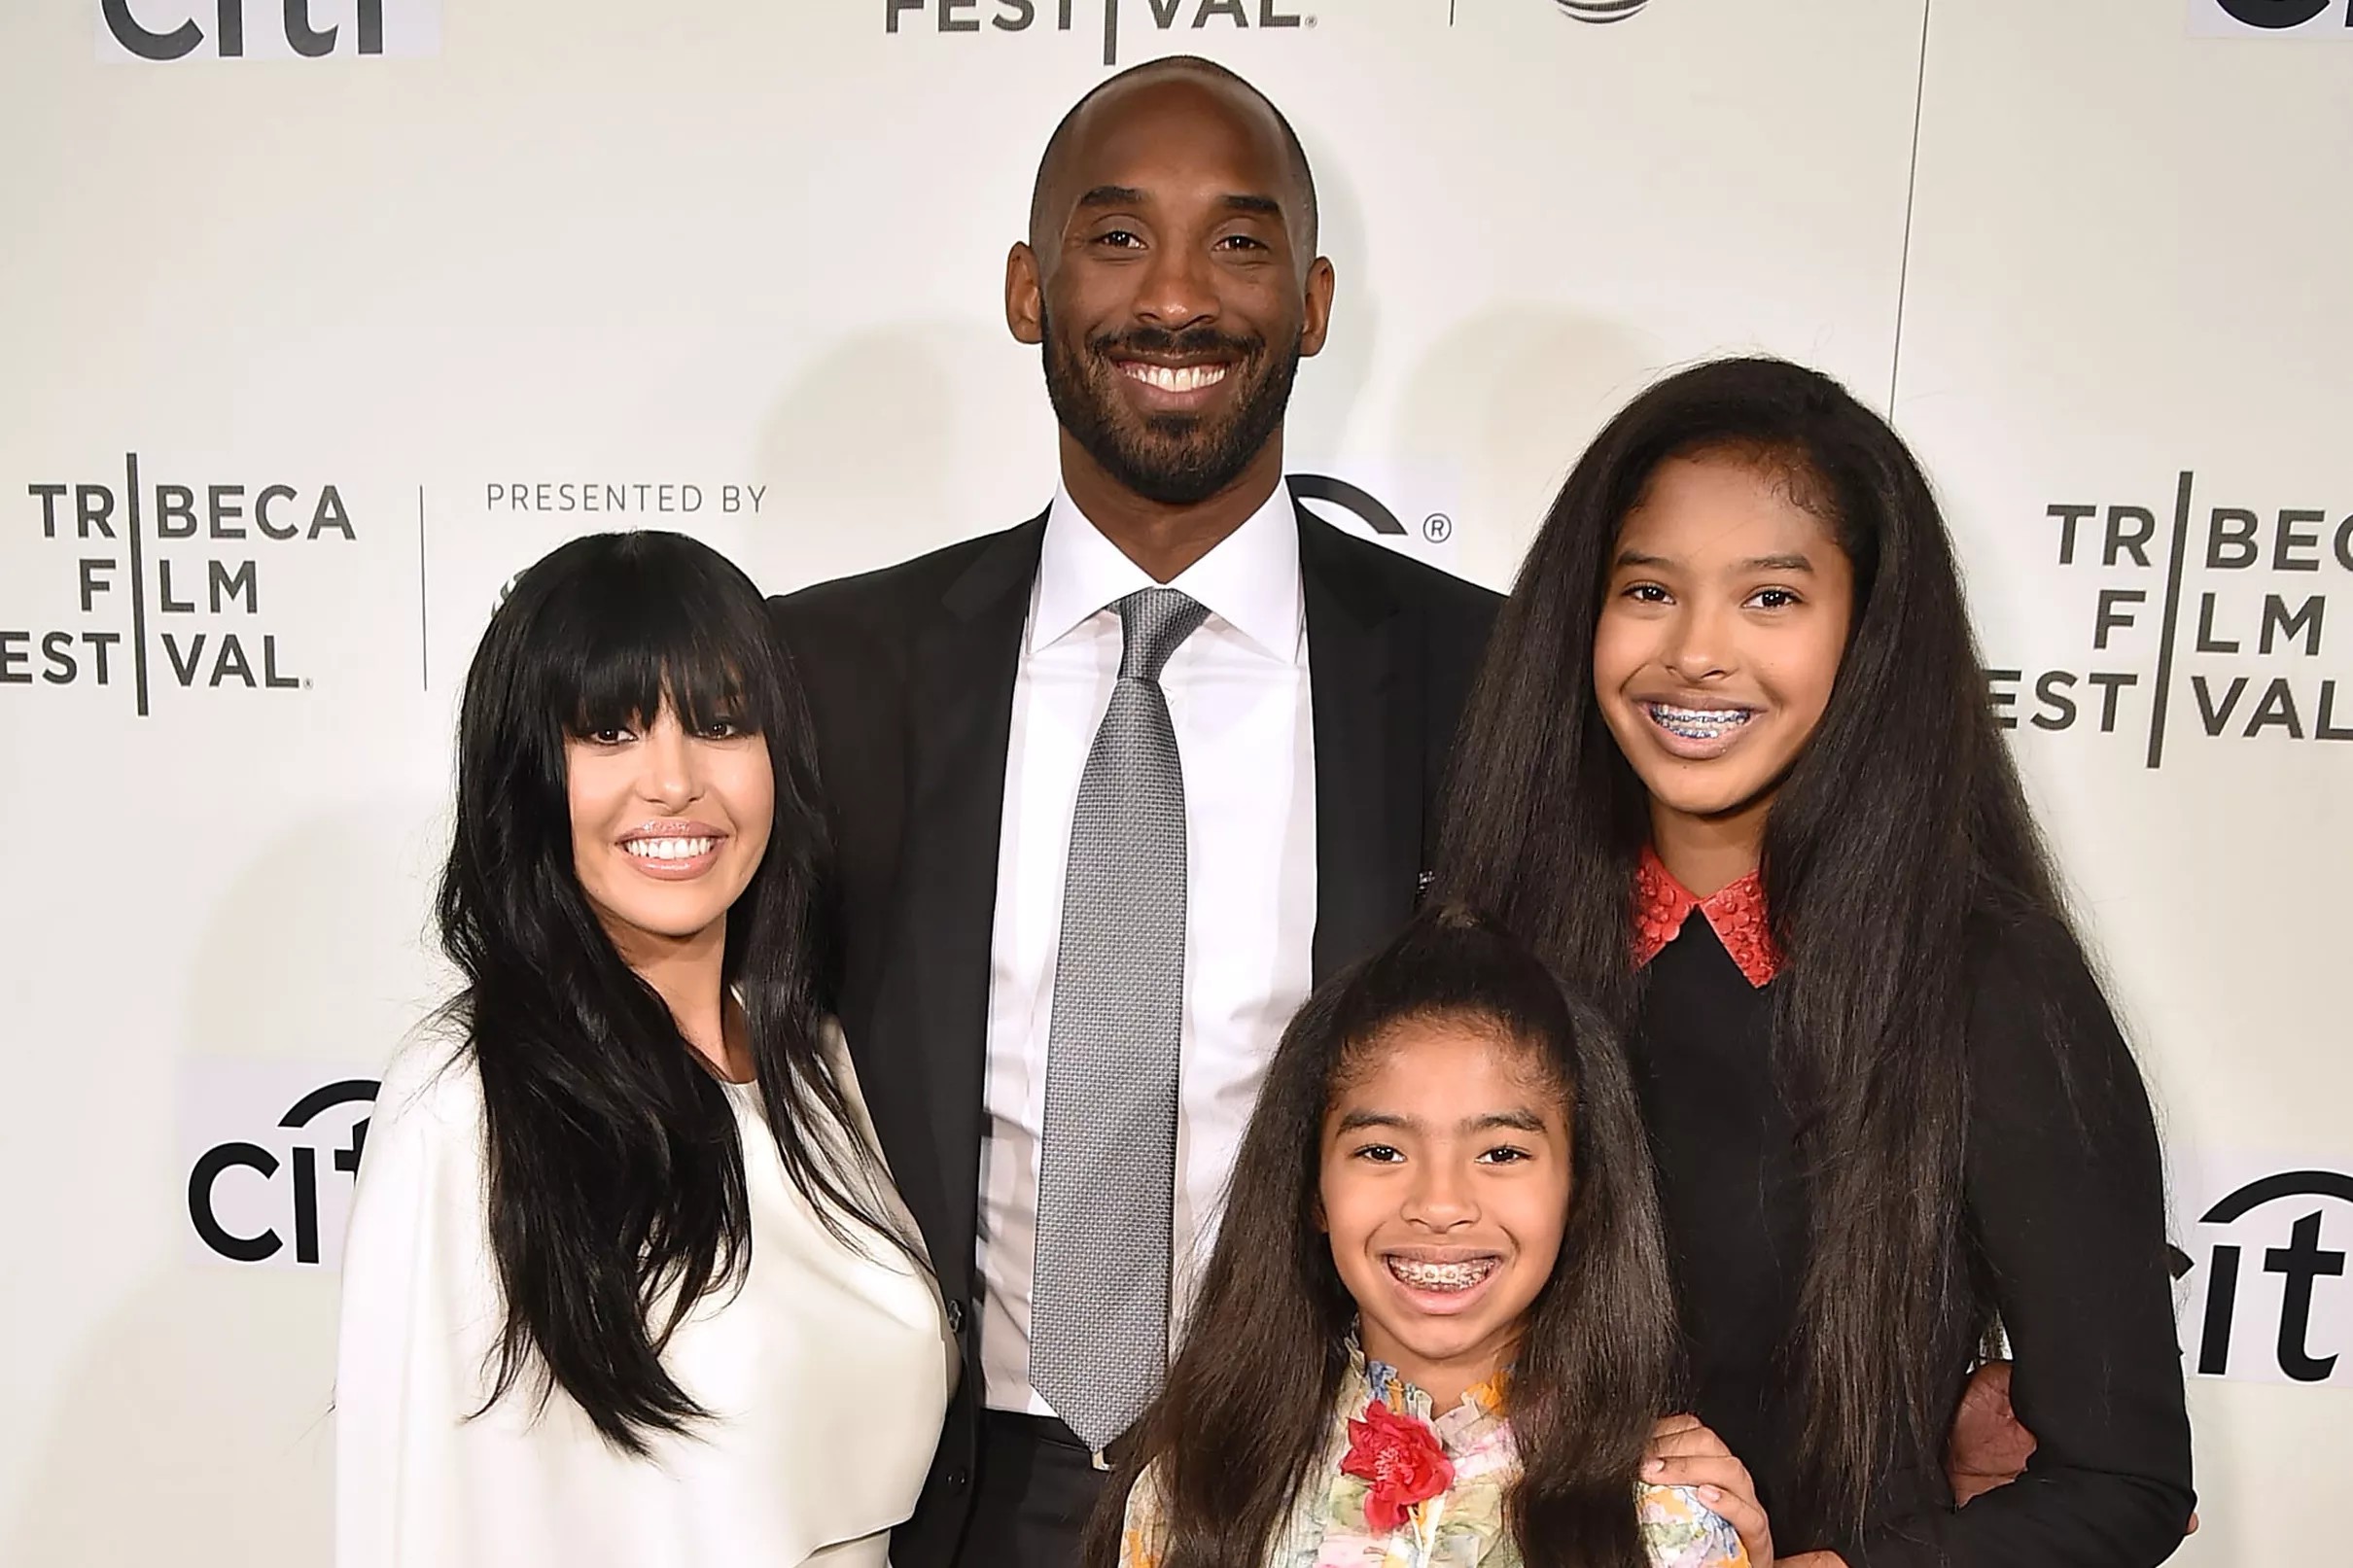 Watch: Kobe Bryant’s daughter is ready to drop 81 on you